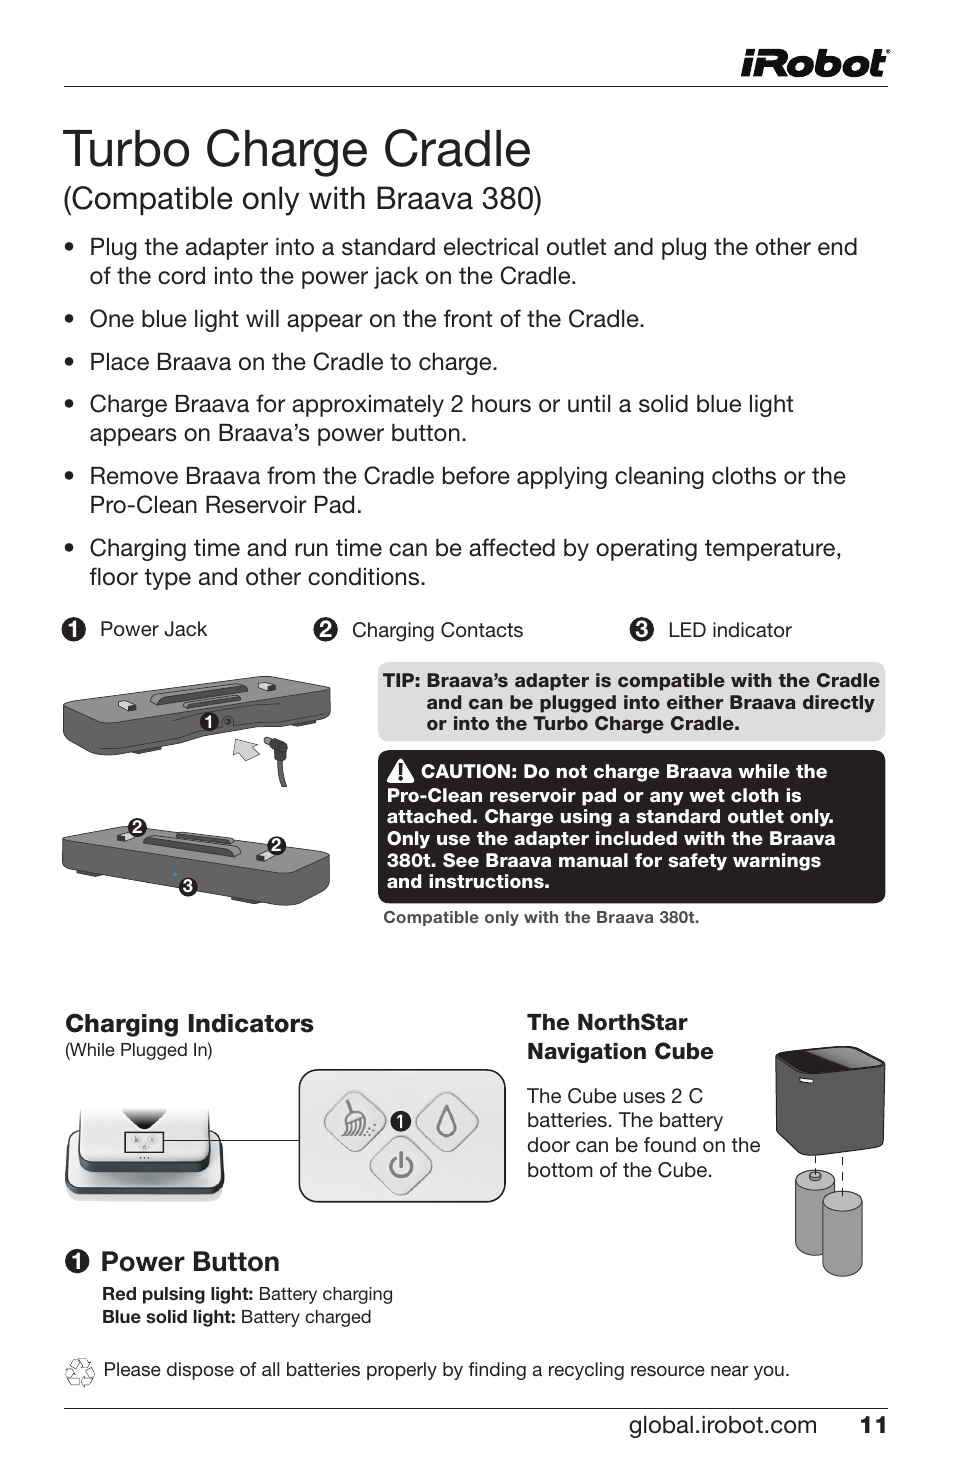 Turbo charge cradle, Compatible only with braava 380), Power button | iRobot  Braava 300 Series User Manual | Page 11 / 28